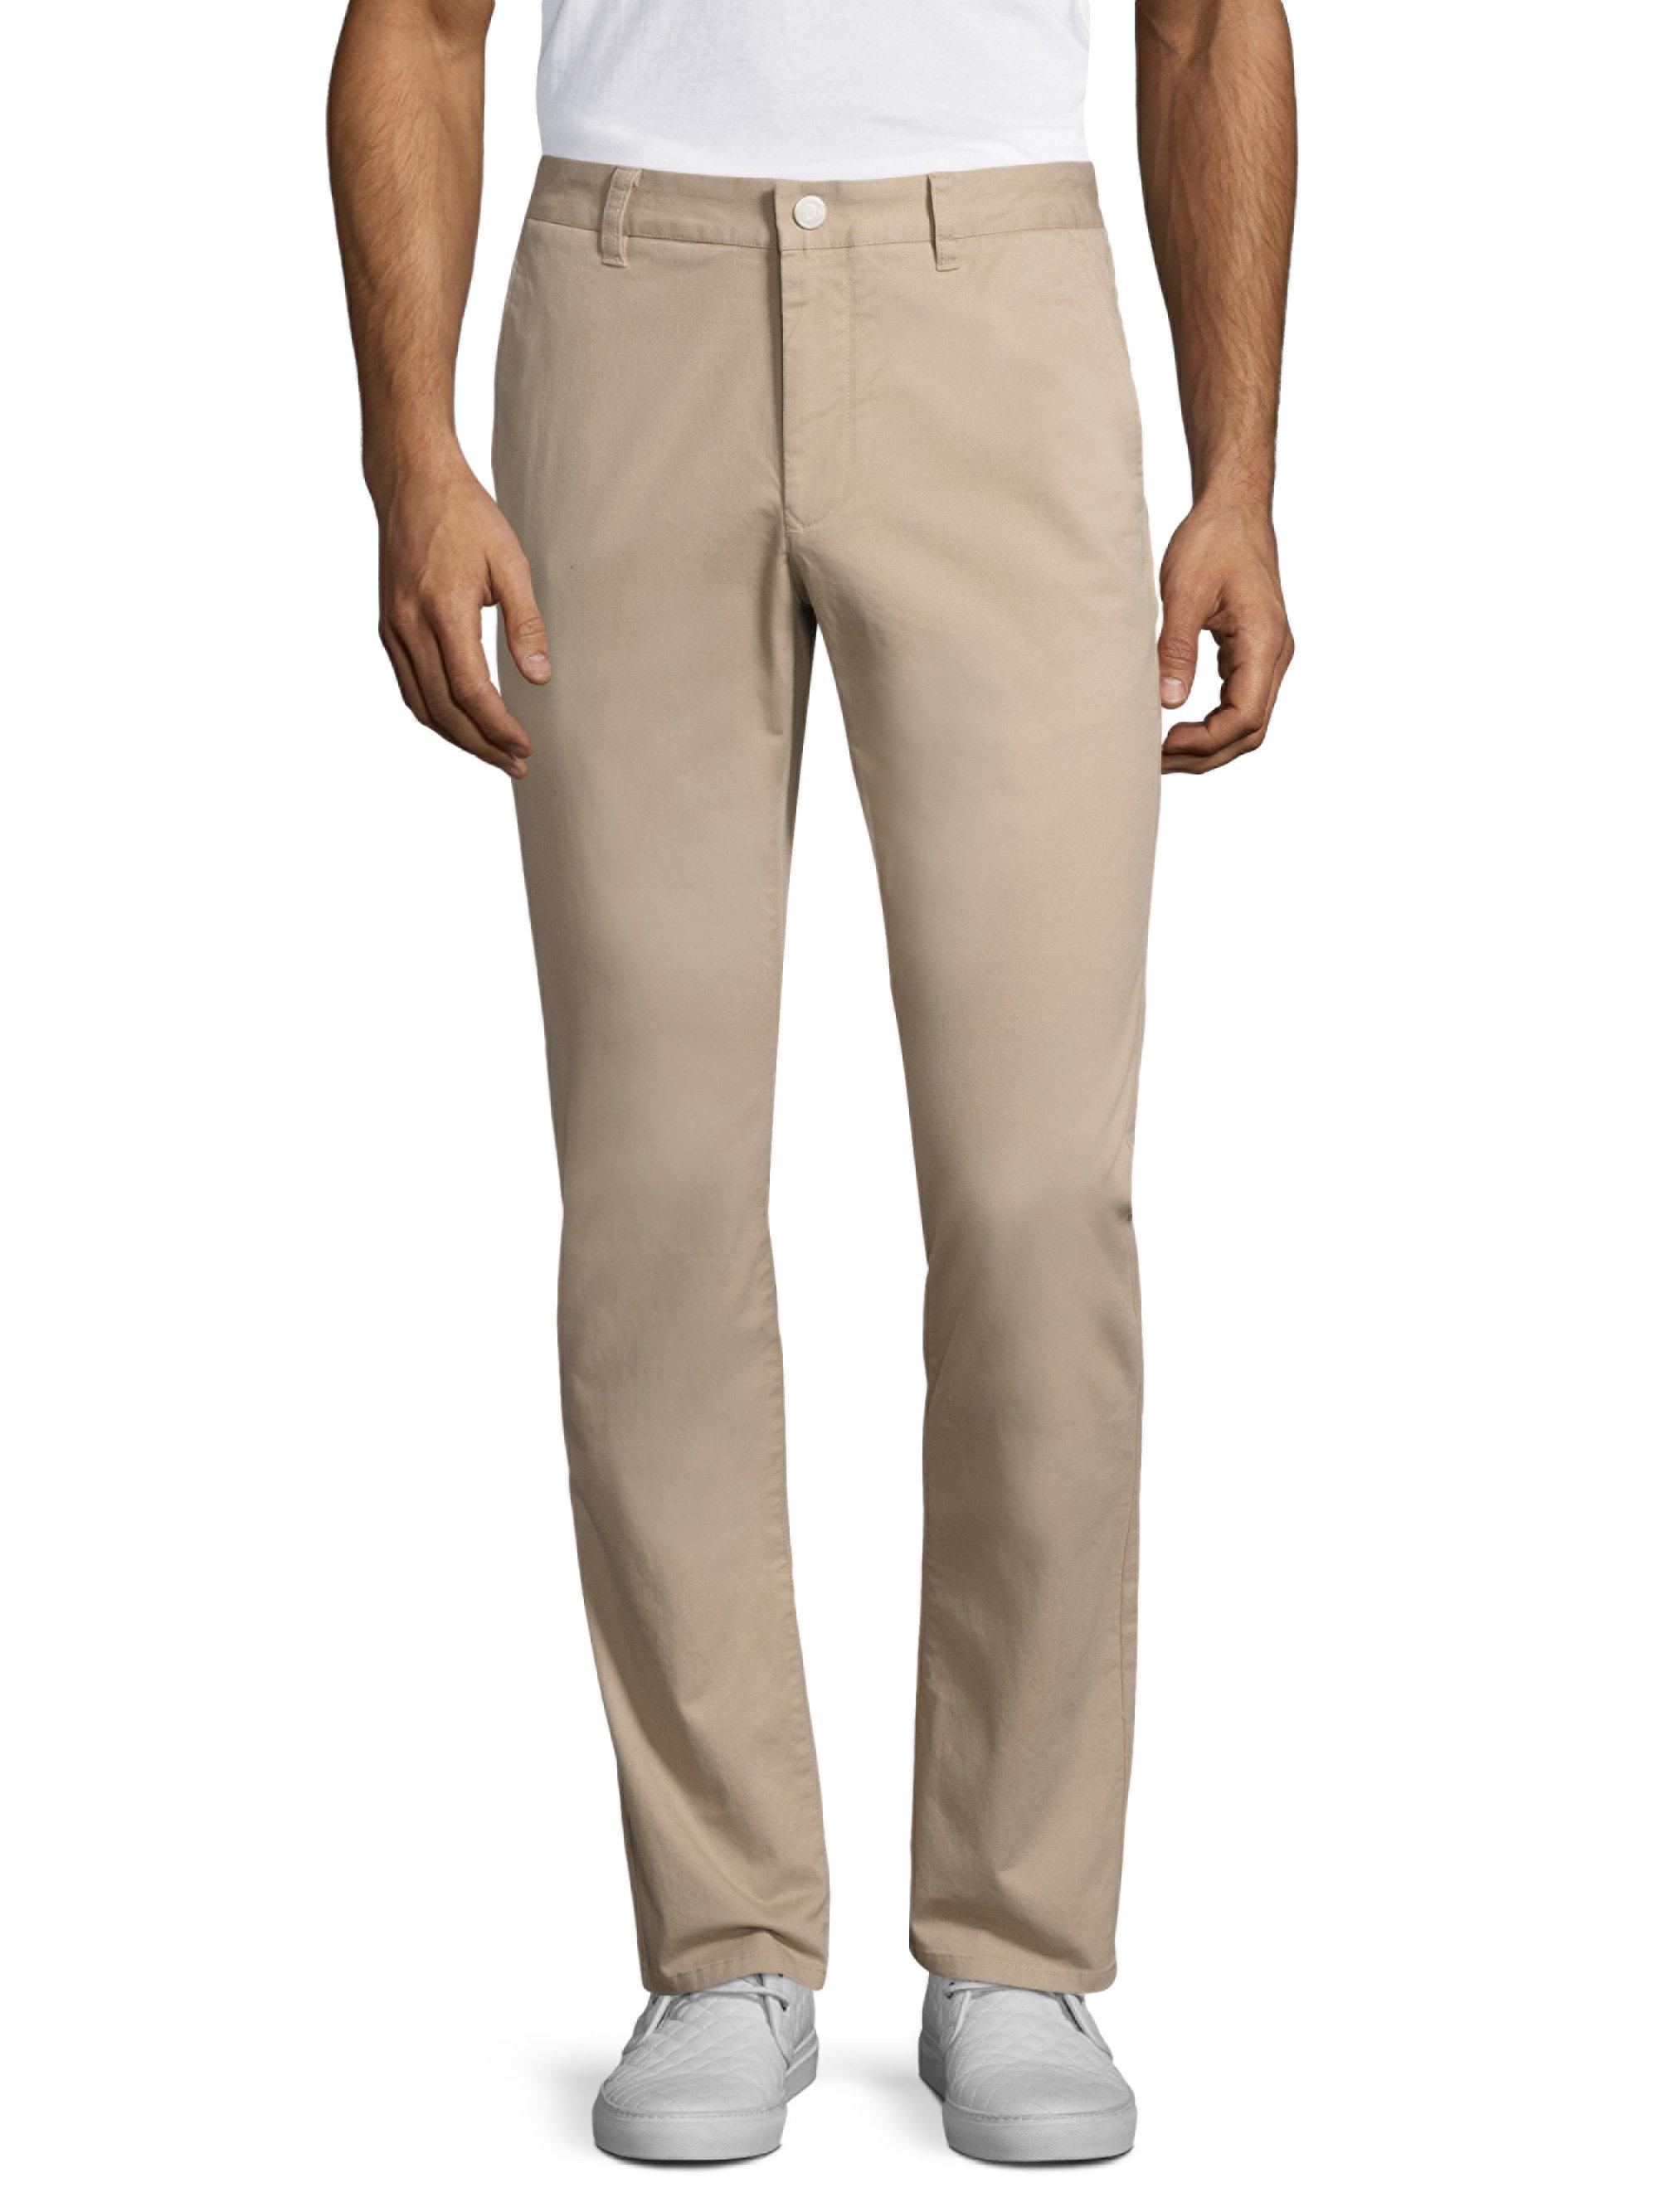 Lyst - Bonobos Washed Stretch Cotton Pants in Natural for Men